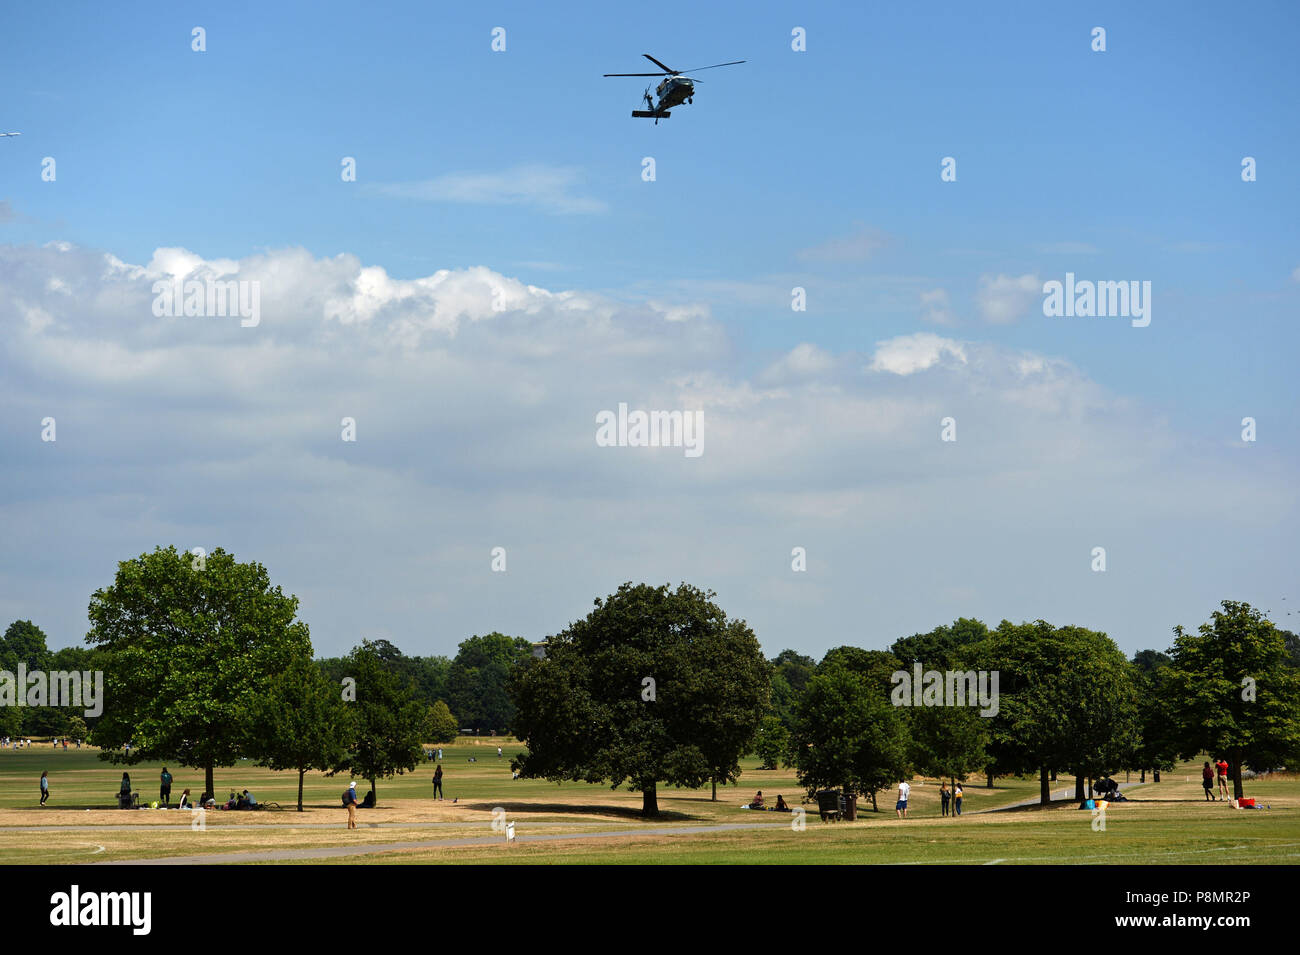 A helicopter of the US Marine Corps - one of two identical aircraft used by US President -flies nearthe residence of the US ambassador in London's Regent's Park, where US President Donald Trump is spending Wednesday night. Stock Photo